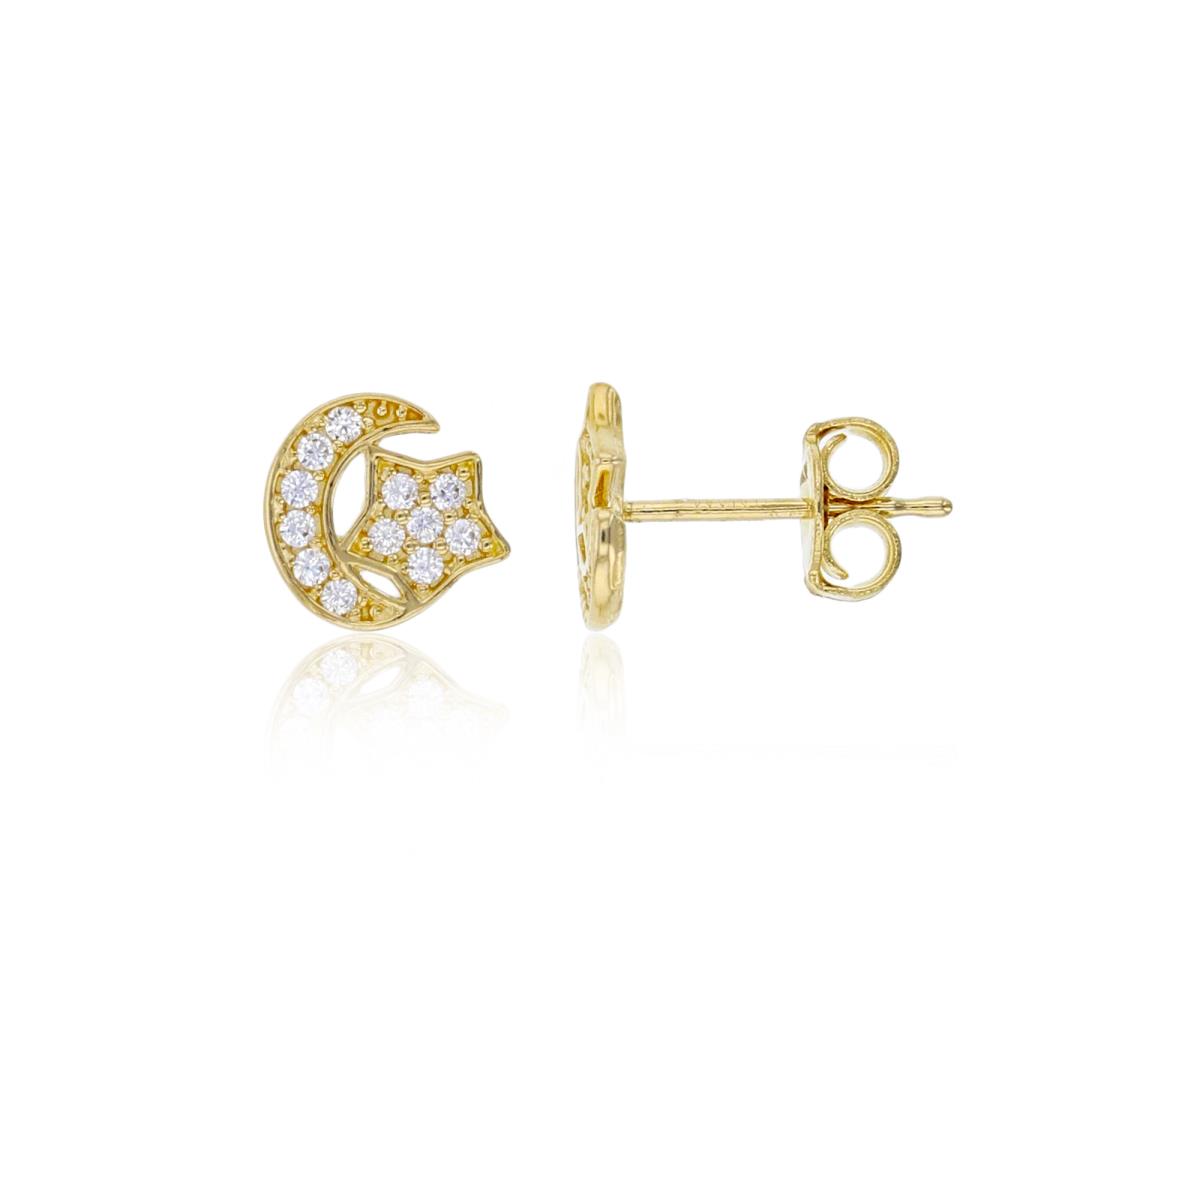 14K Yellow Gold 6x6mm Pave Moon & Star Stud Earring with 4.5mm Clutch